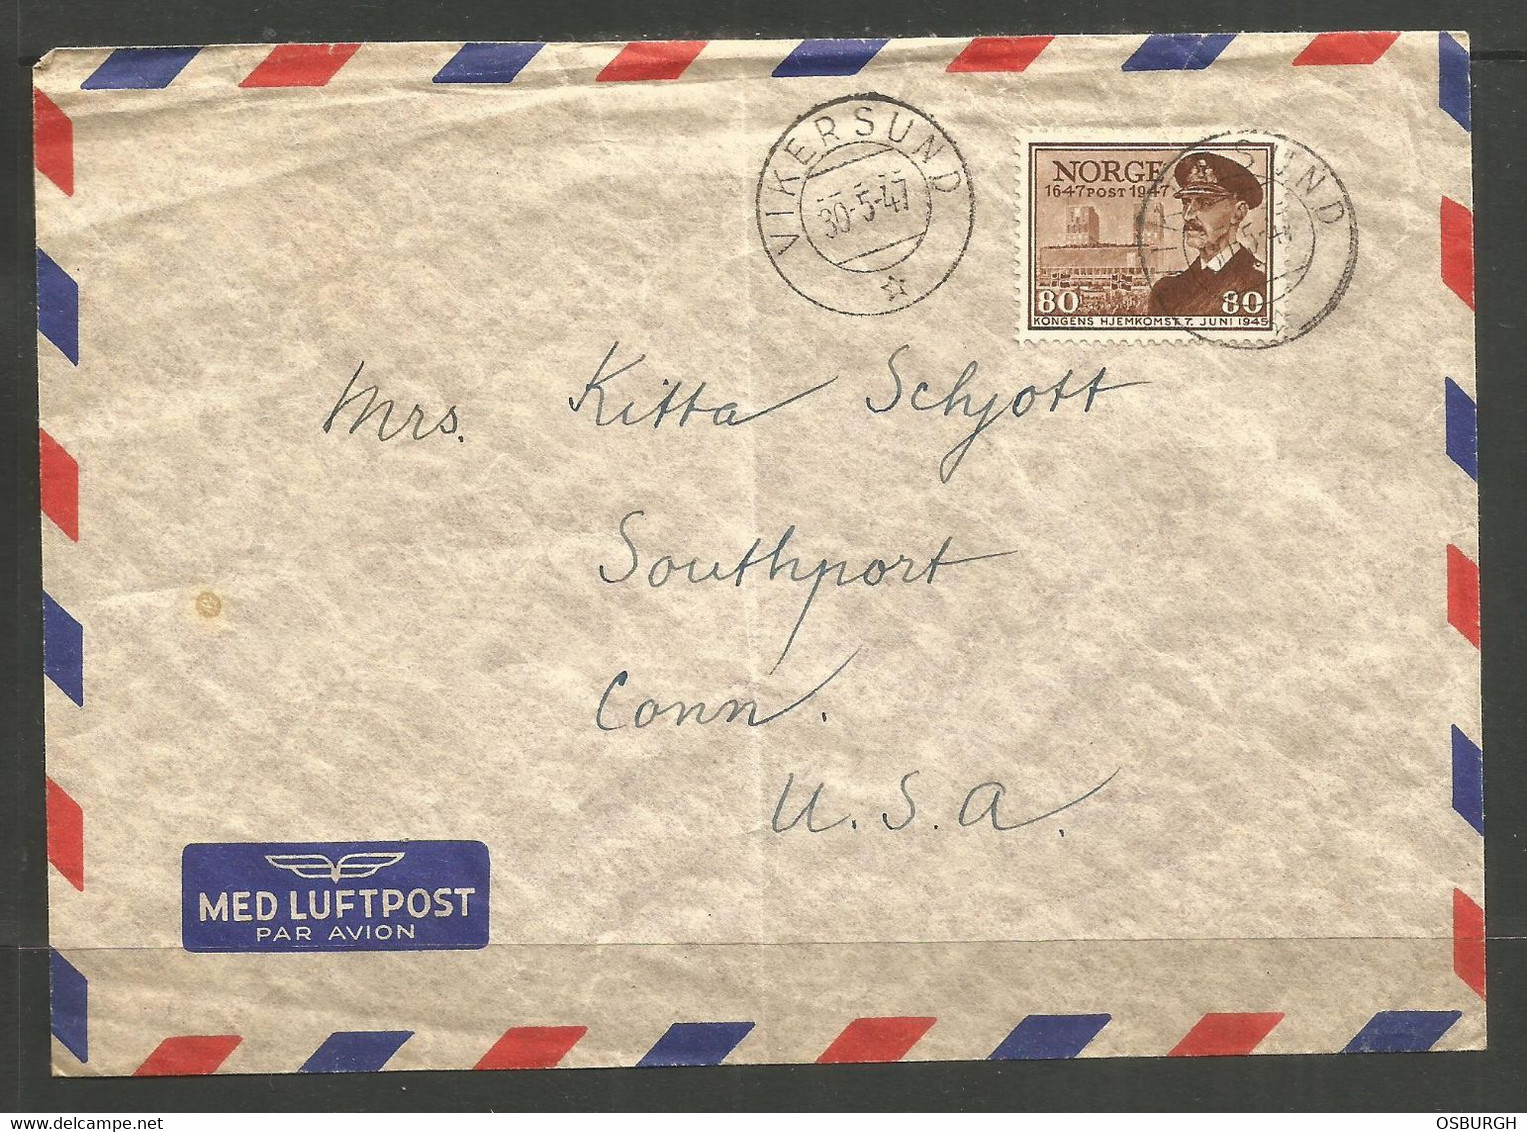 NORWAY. 1947. AIR MAIL COVER. VIKERSUND TO SOUTHPORT CONNECTICUT - Cartas & Documentos